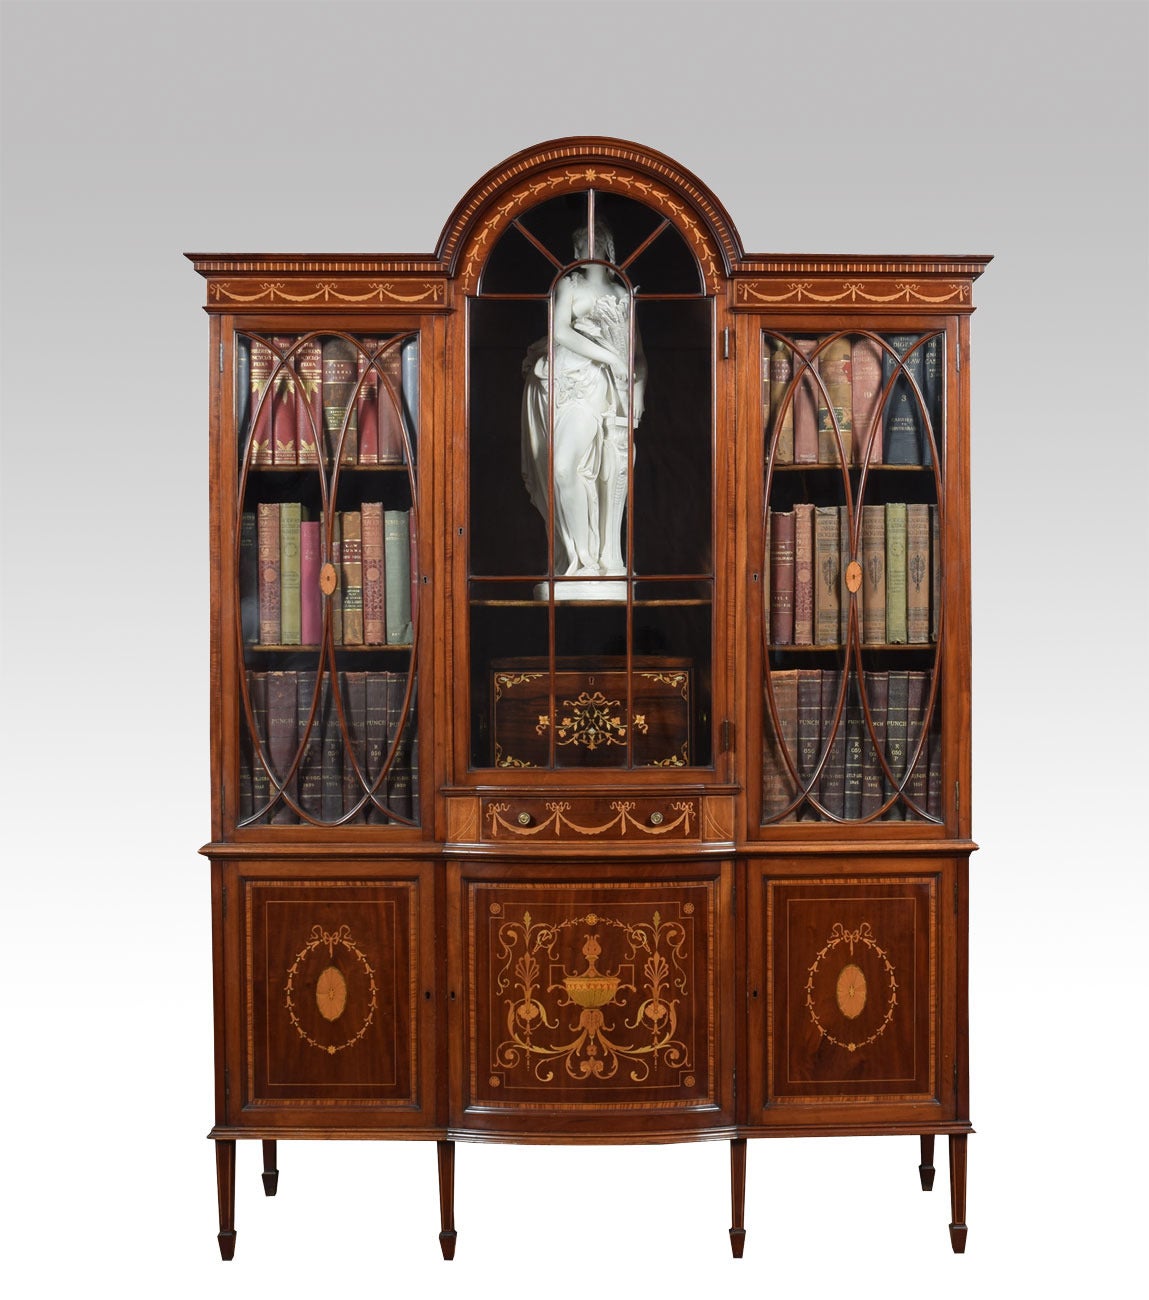 Late 19th century Sheraton Revival mahogany inlaid display cabinet bookcase, the dome top with dentil-inlaid cornice with bell-flower, above three astragal-glazed doors enclosing wooden shelves, the base section fitted with central slender drawer